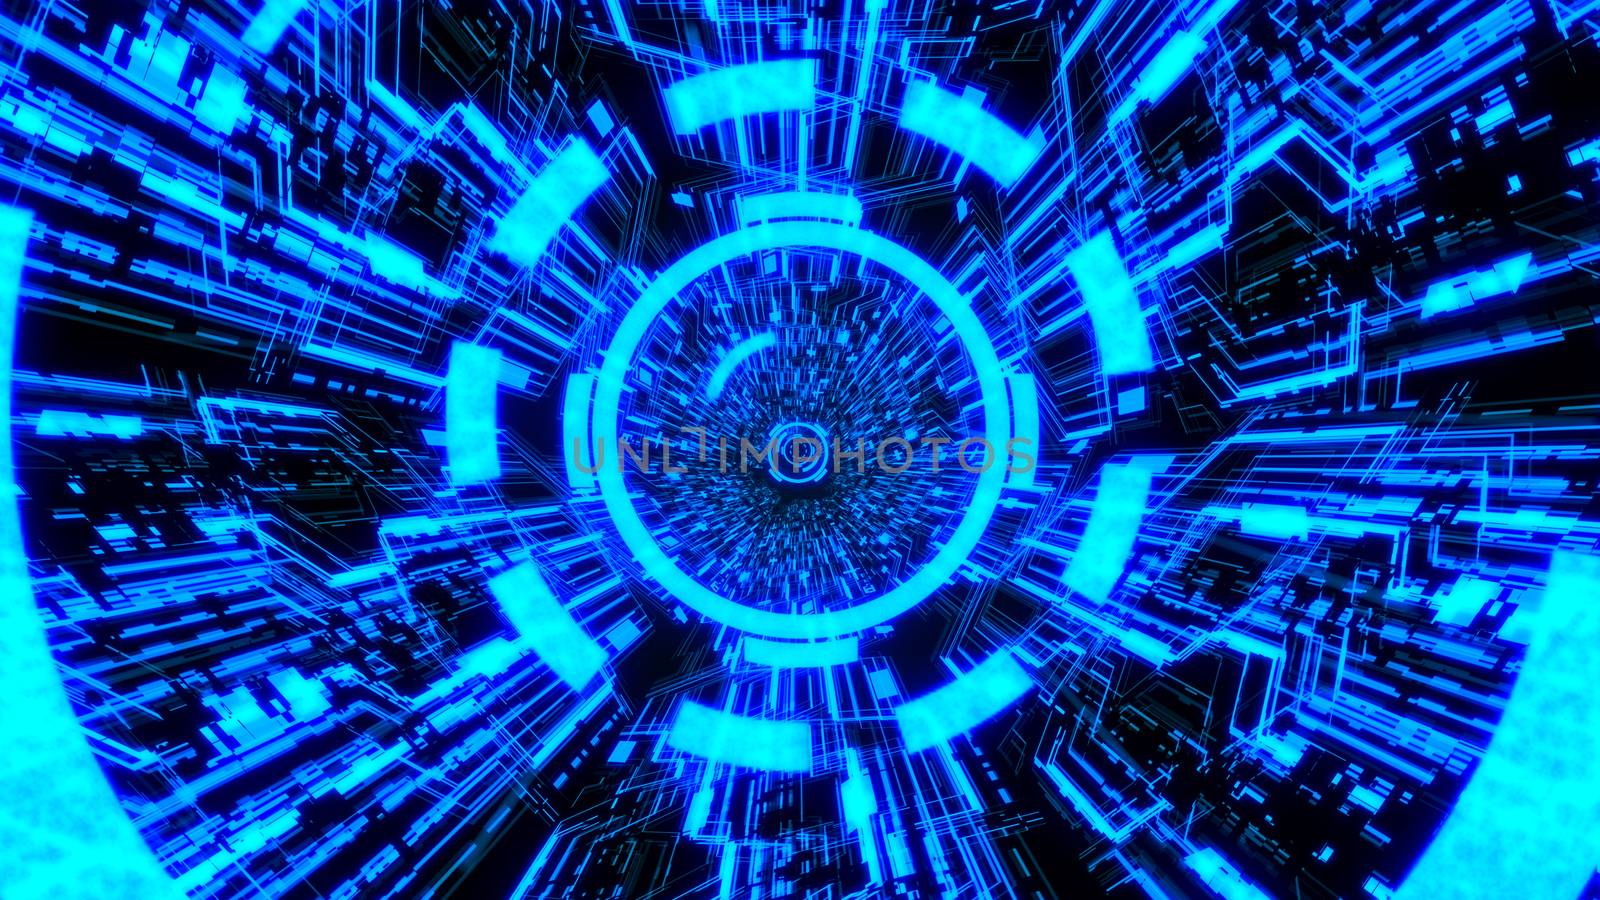 3D Digital Circuit System Tunnels and Waves with Digital Circles in the middle in Blue color theme Background Ver.4 by ariya23156